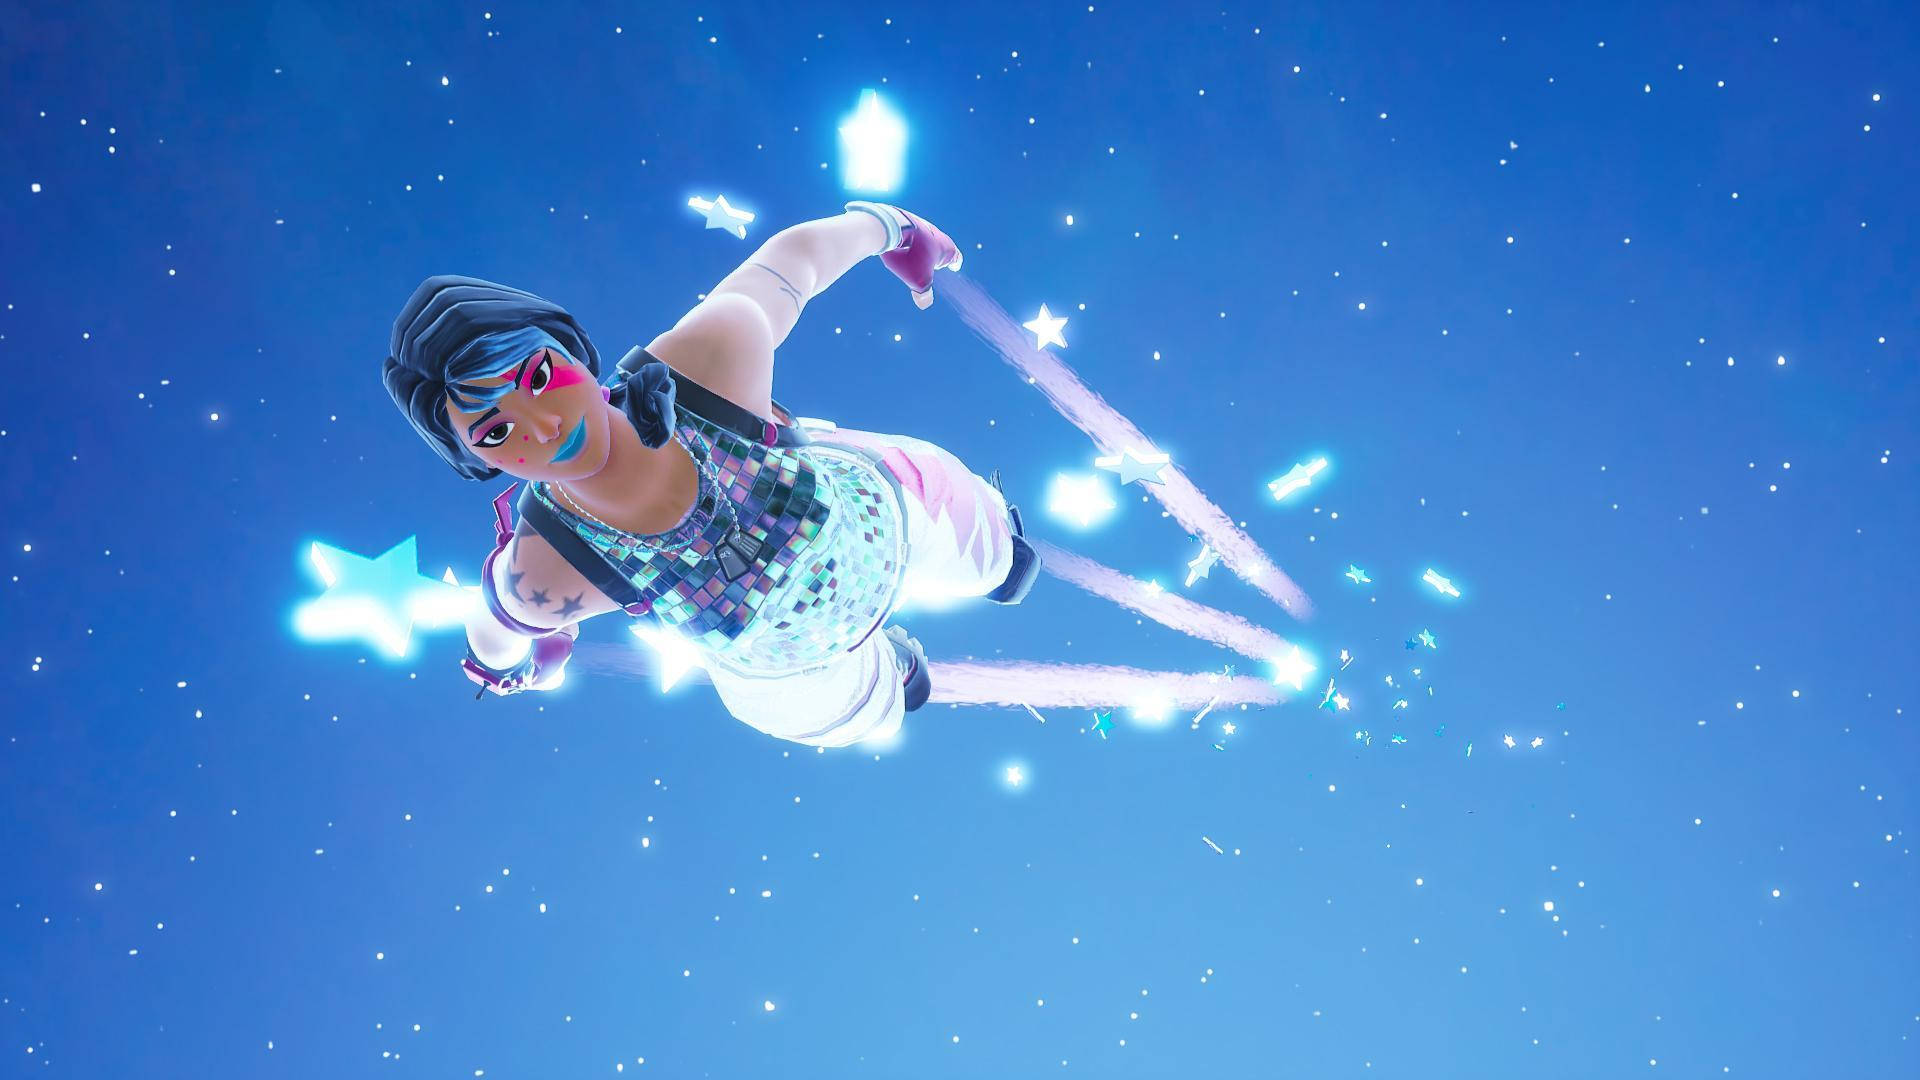 Get ready to dominate the dance floor with the Sparkle Specialist Fortnite outfit! Wallpaper